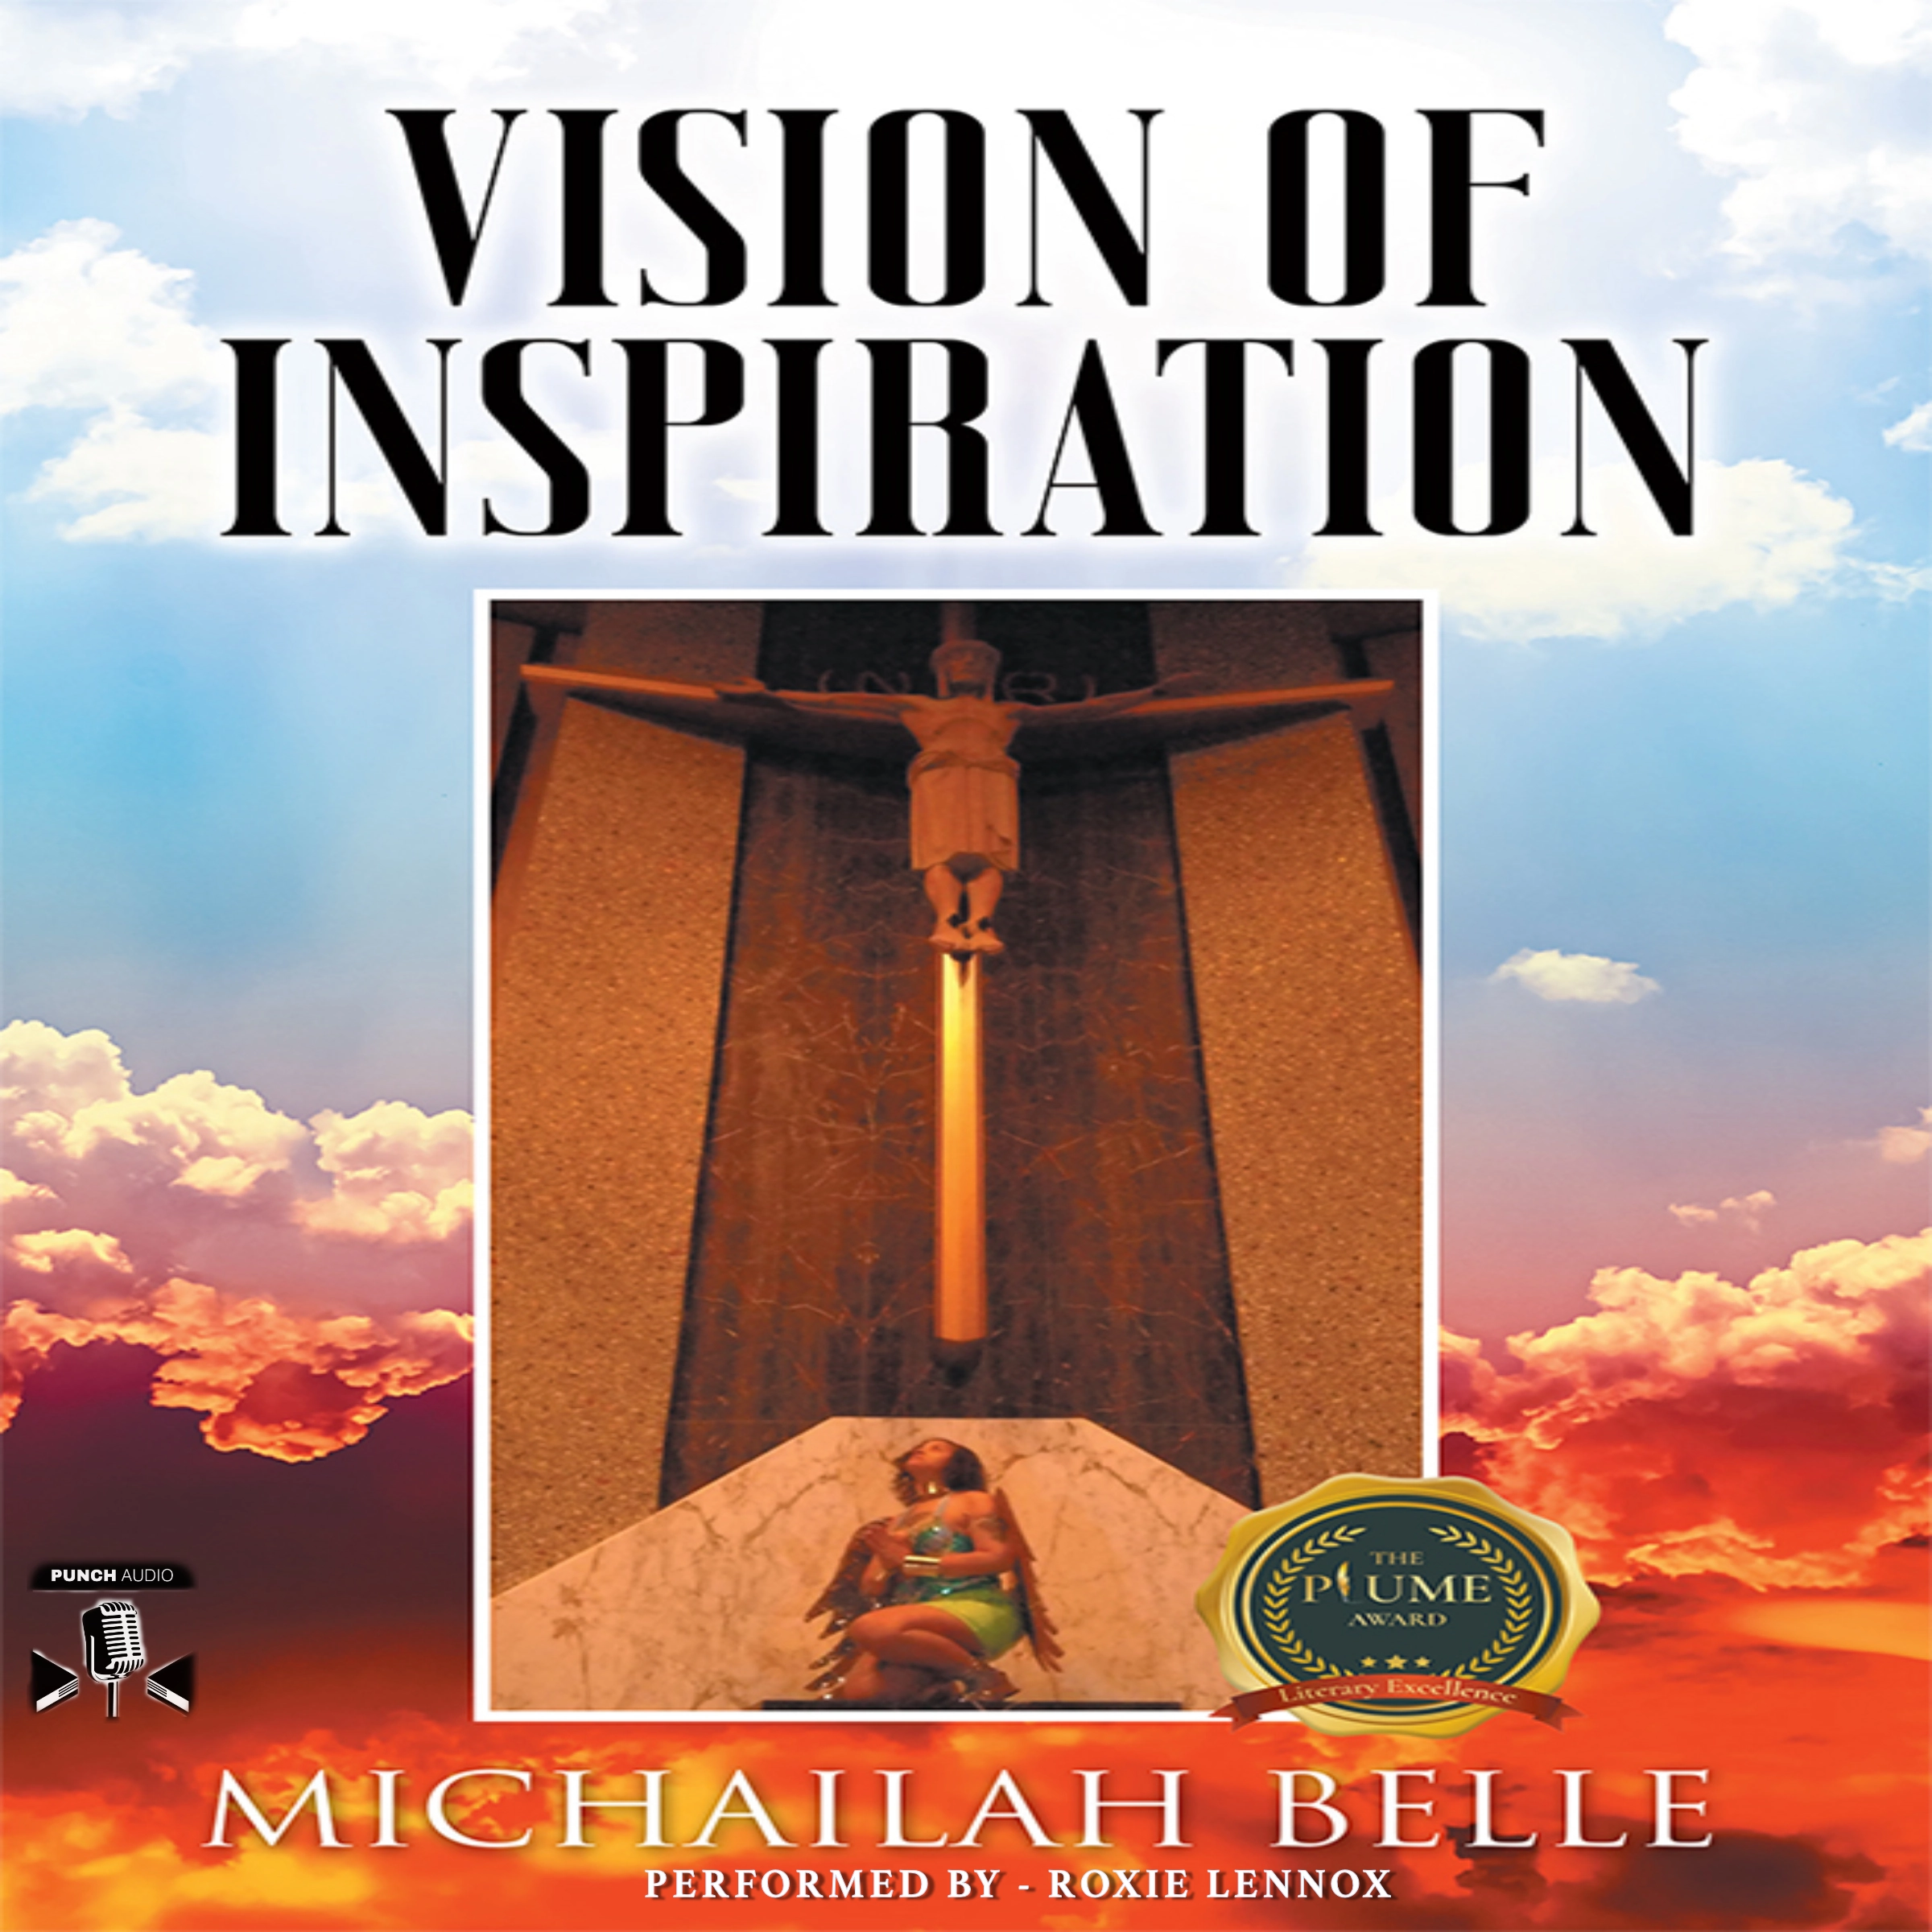 Vision of Inspiration Audiobook by Michailah Belle